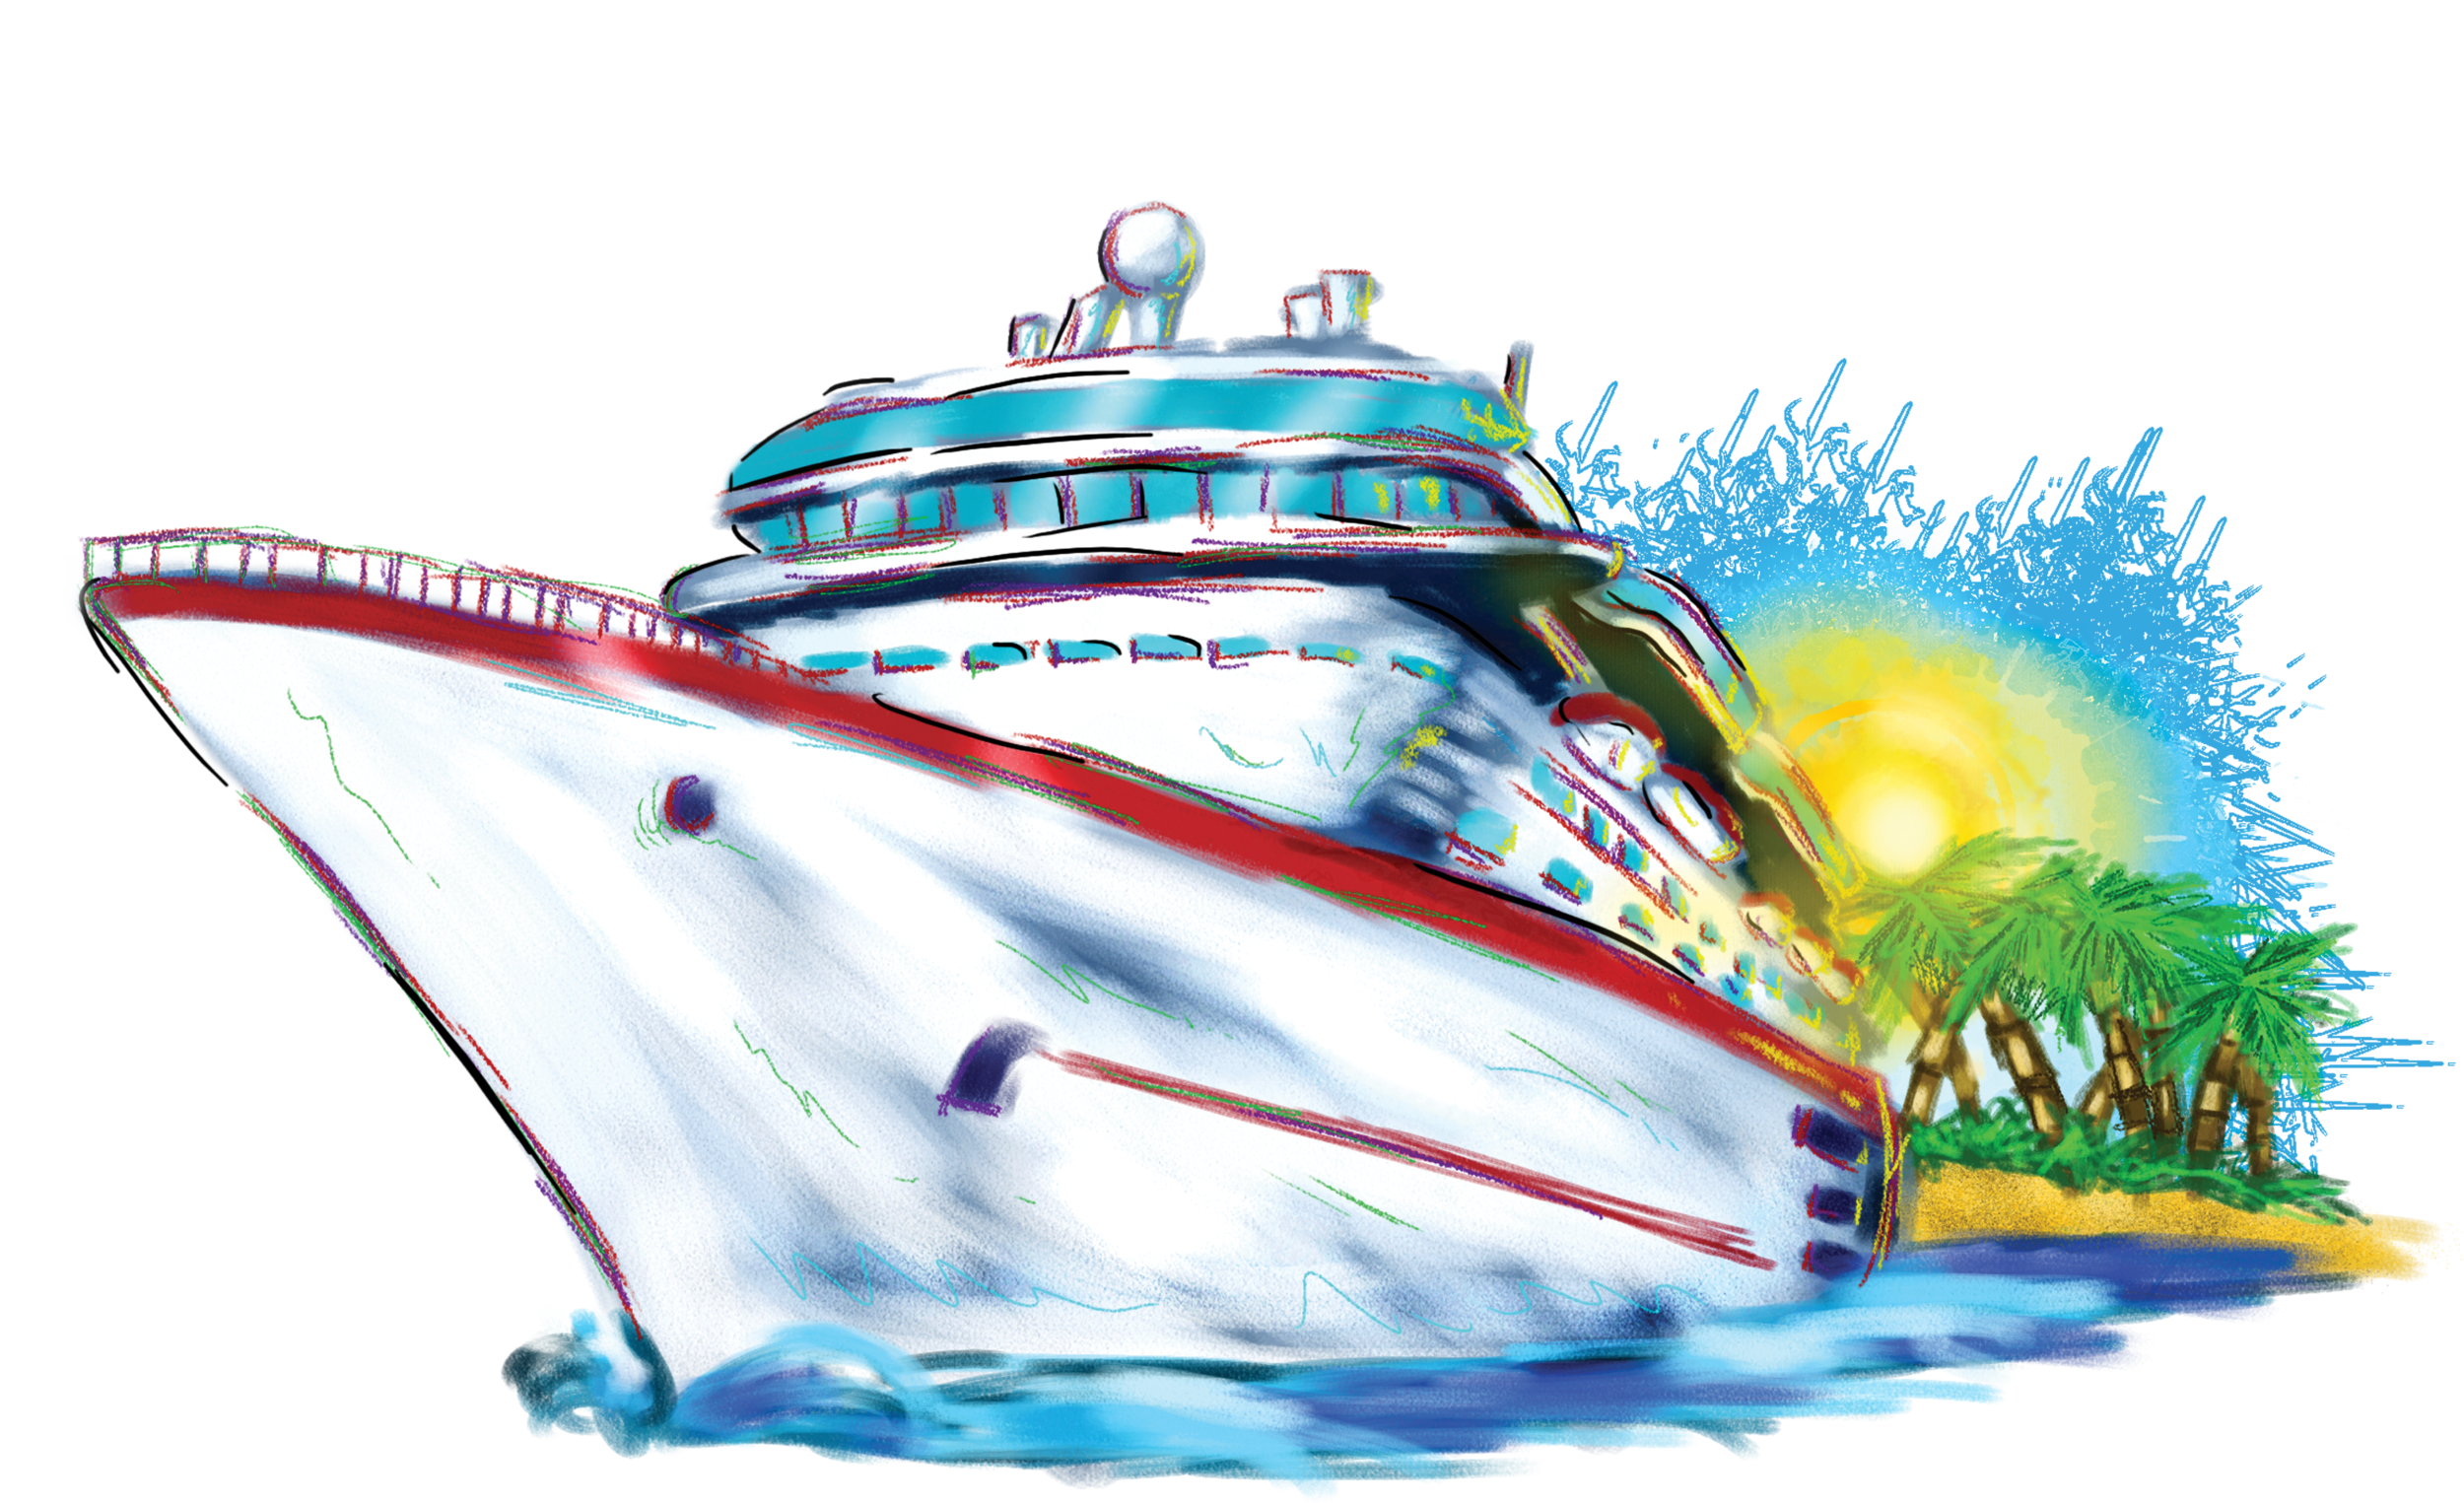 Awesome cruise ship clipart